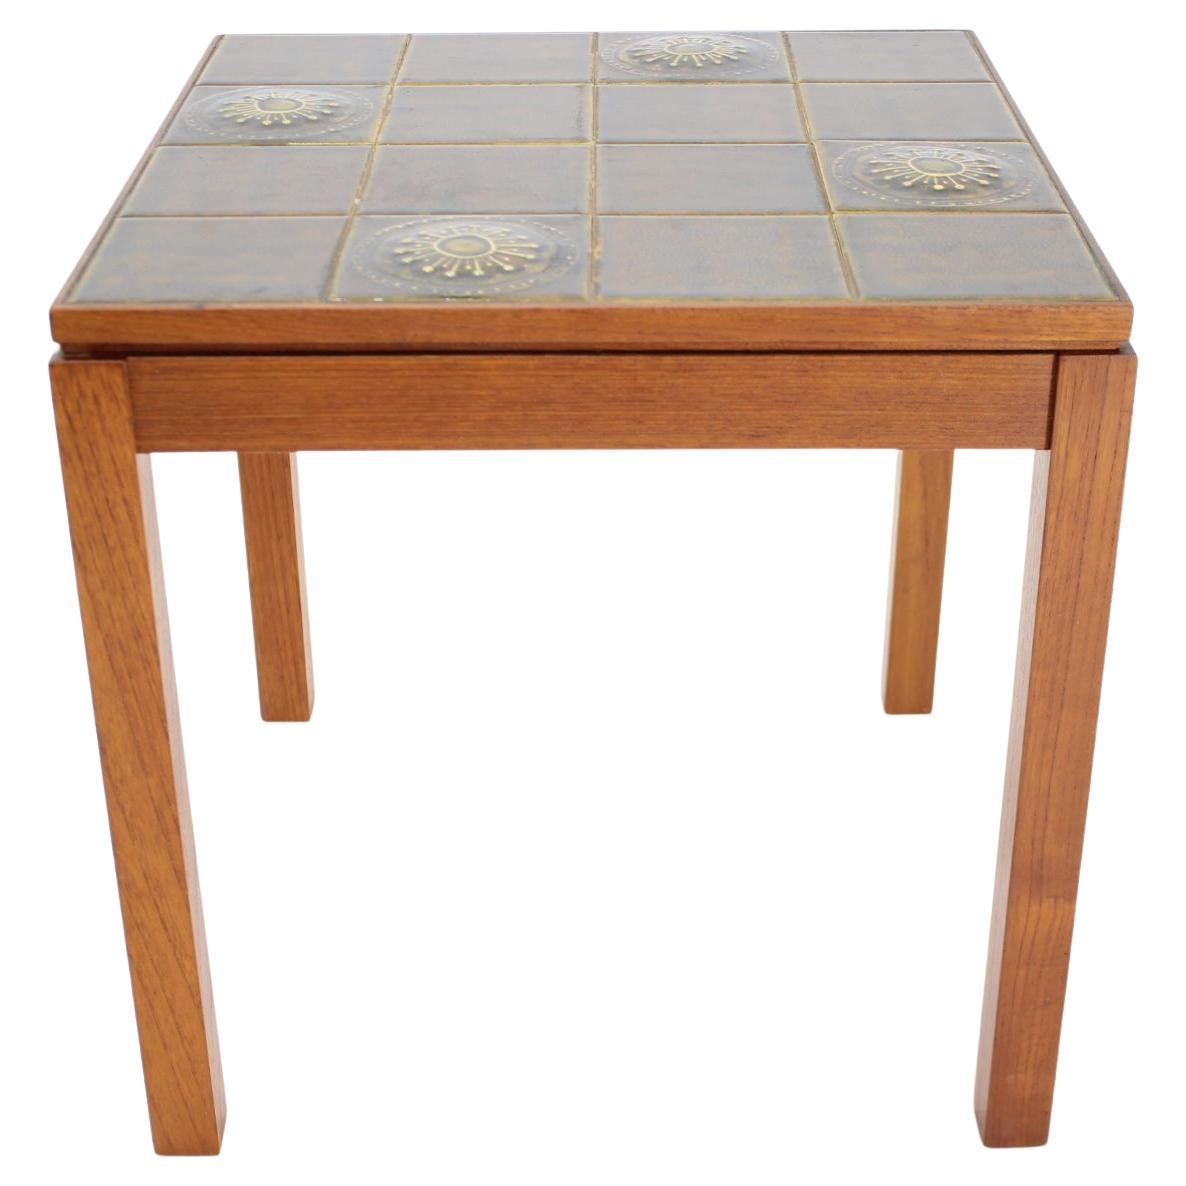 1960s Danish Teak and Tile Side Table For Sale